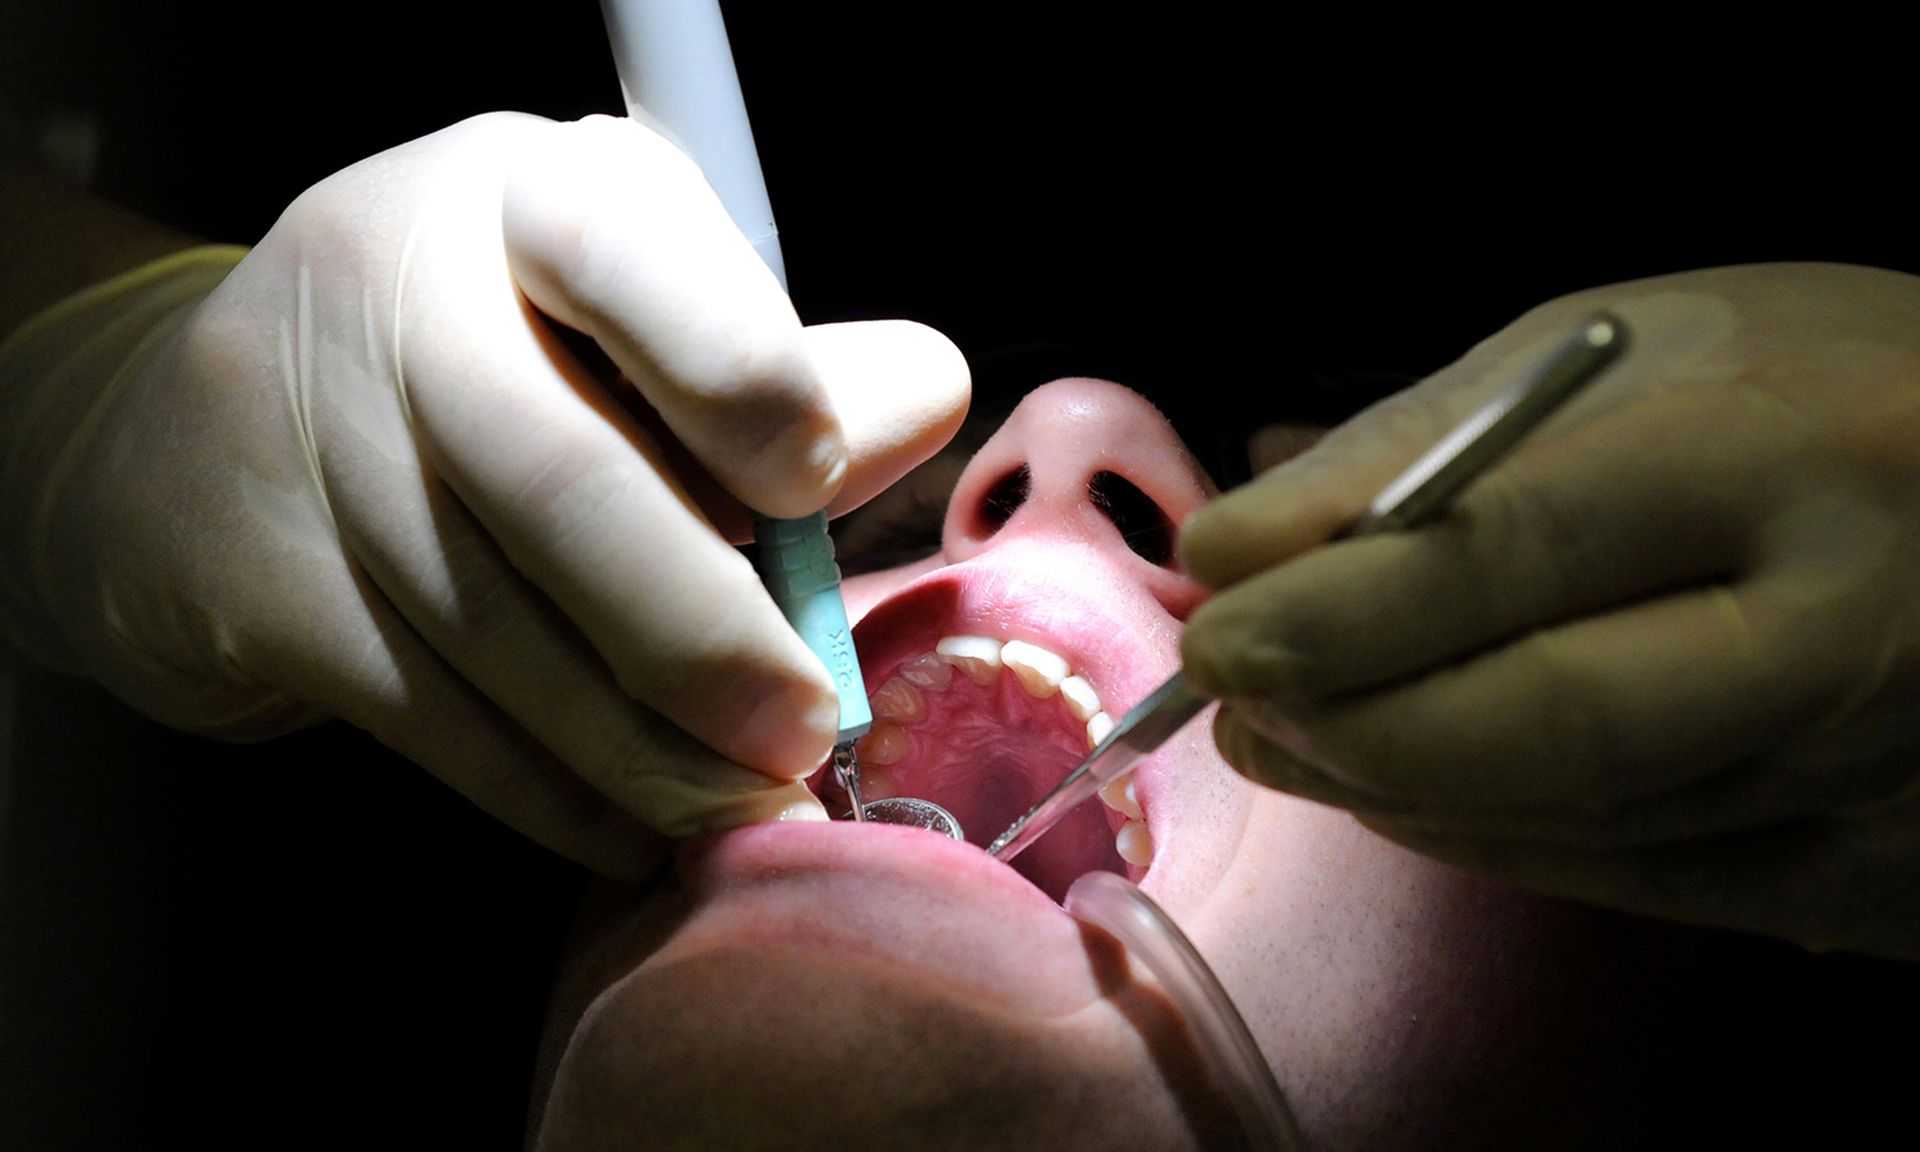 A routine dental cleaning is performed.